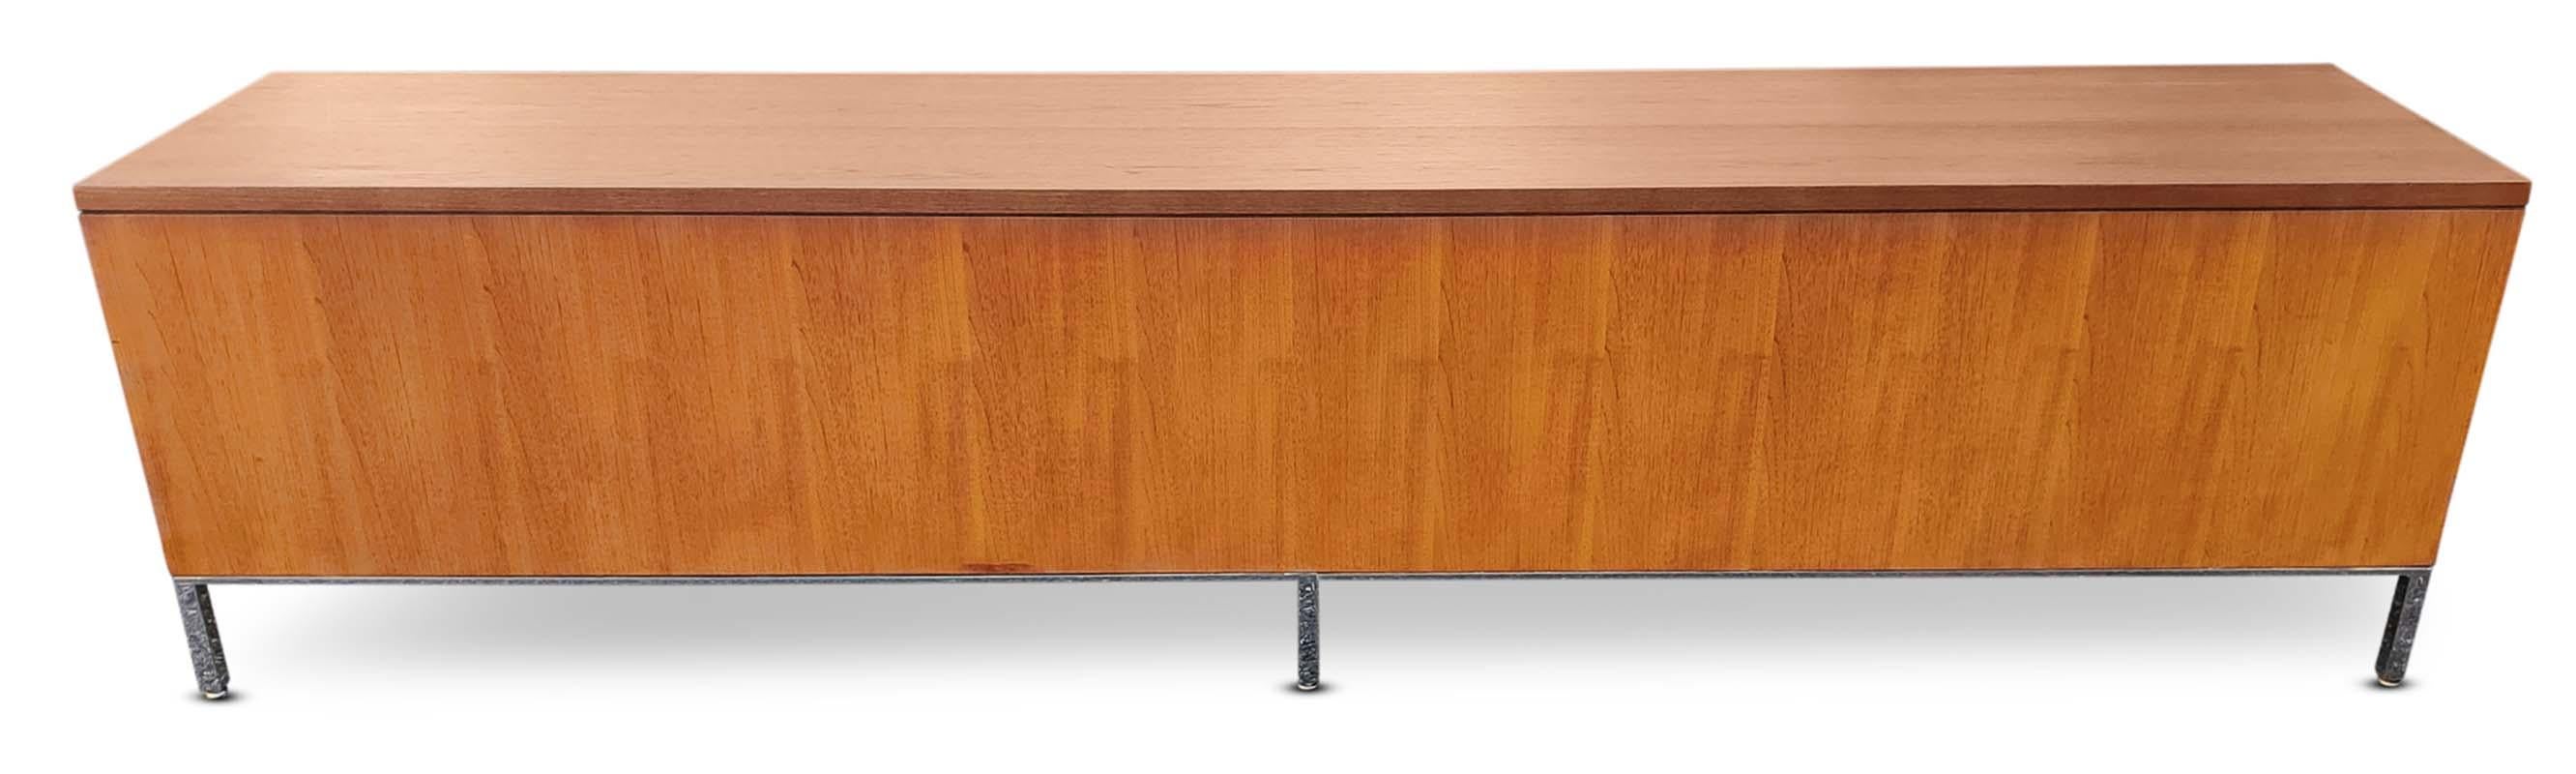 Florence Knoll Attr. Restored Low & Long , Teak & Chrome Credenza Circa 1960s MCM 6